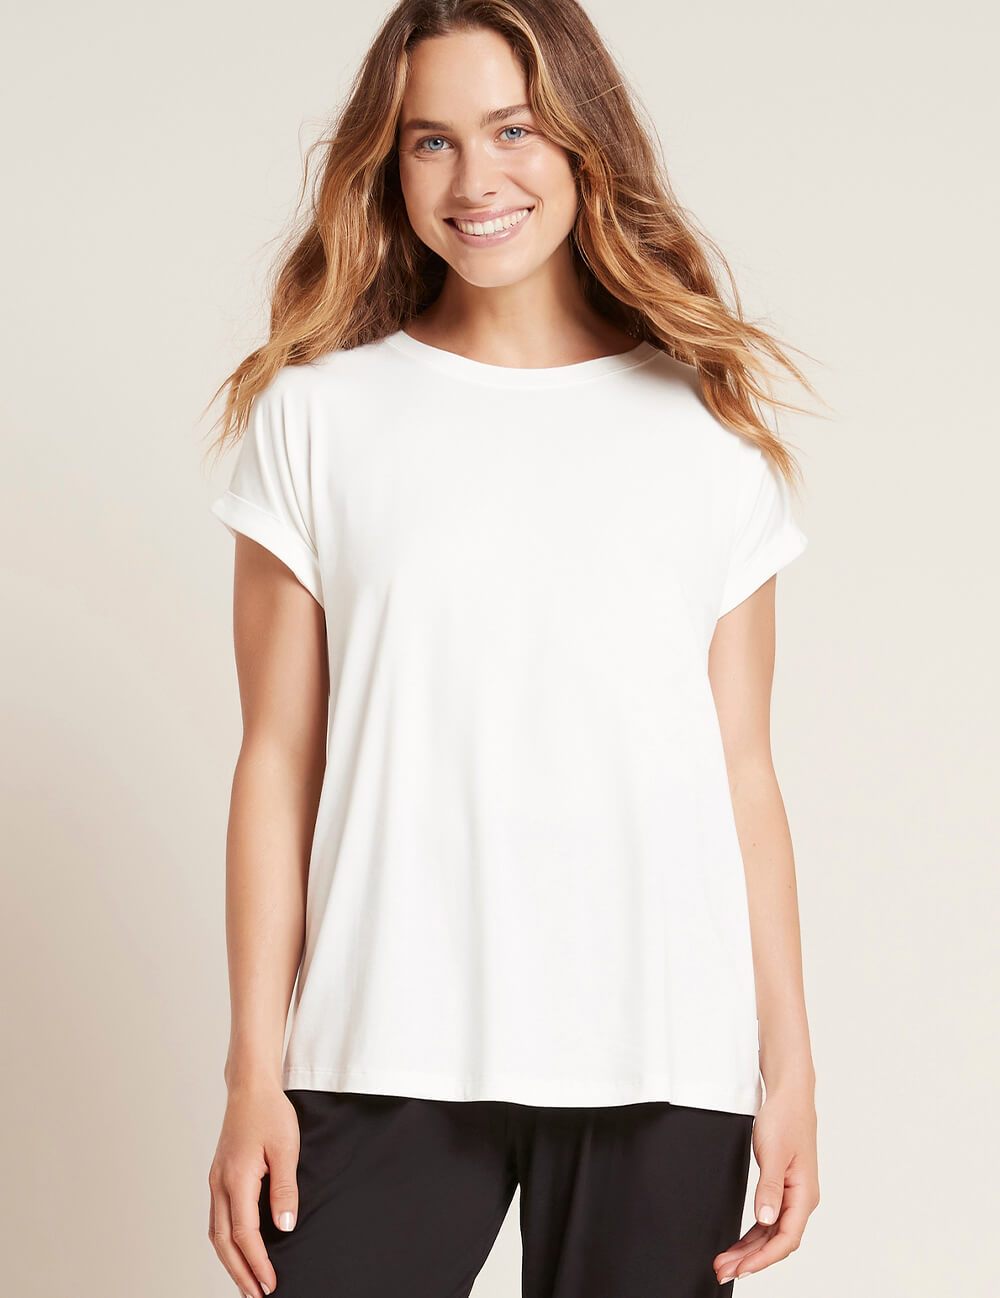 Downtime Lounge Top- Natural White – Local General Store Ltd.